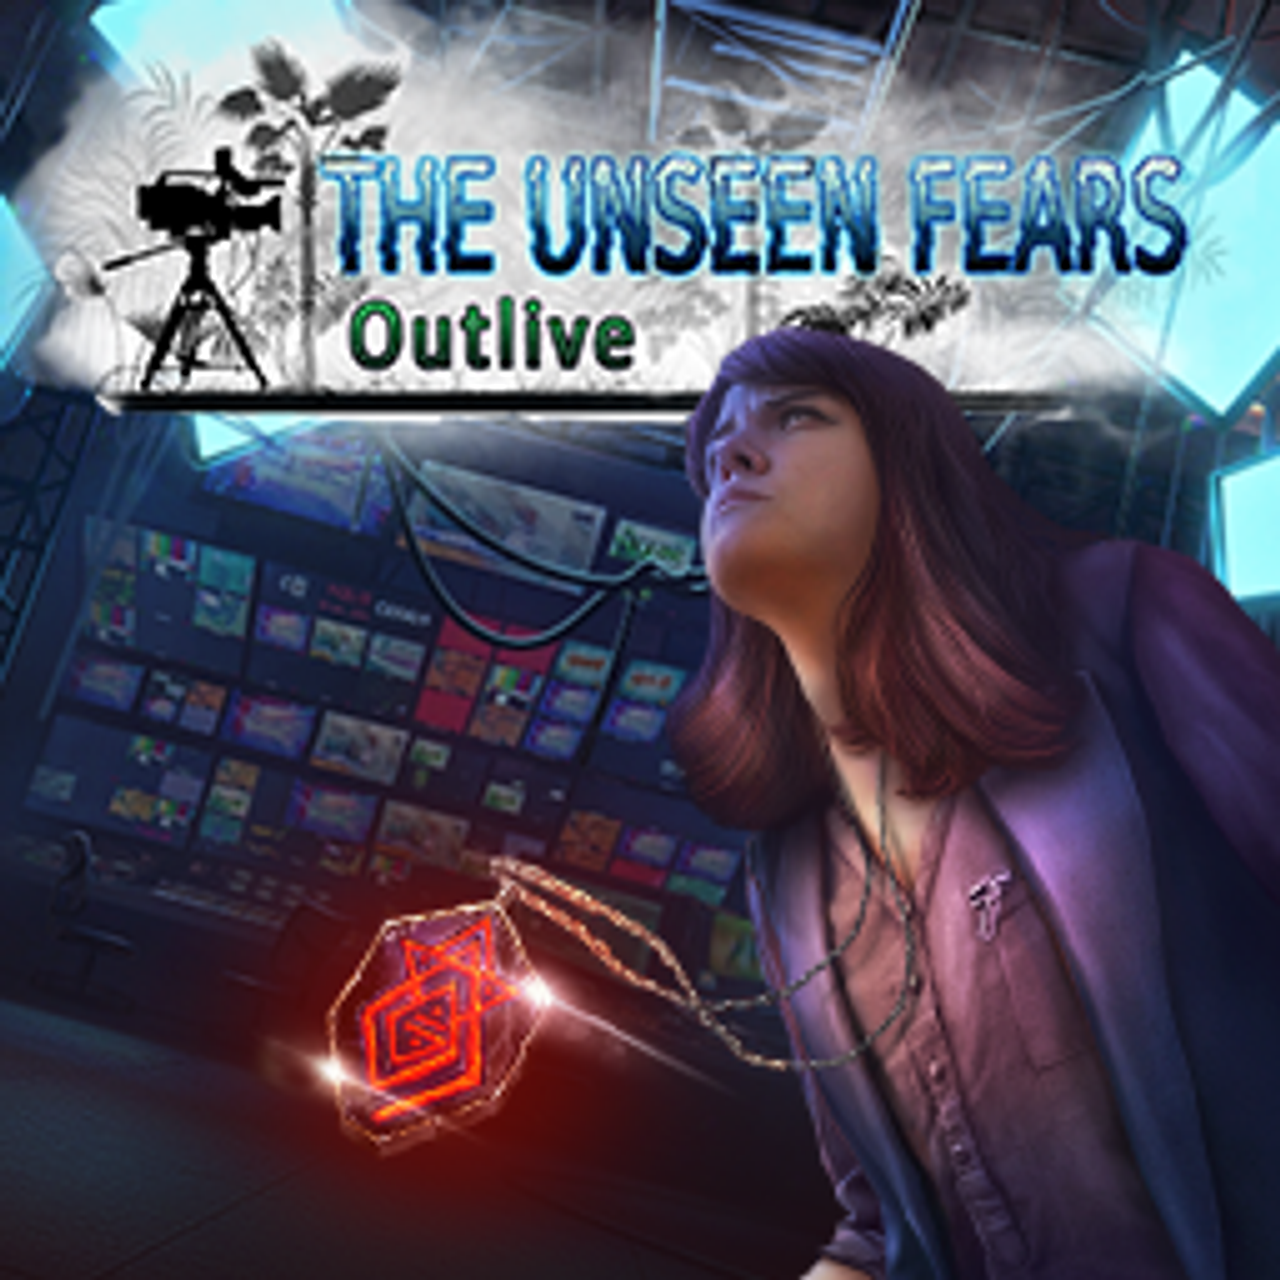 The Unseen Fears: Outlive